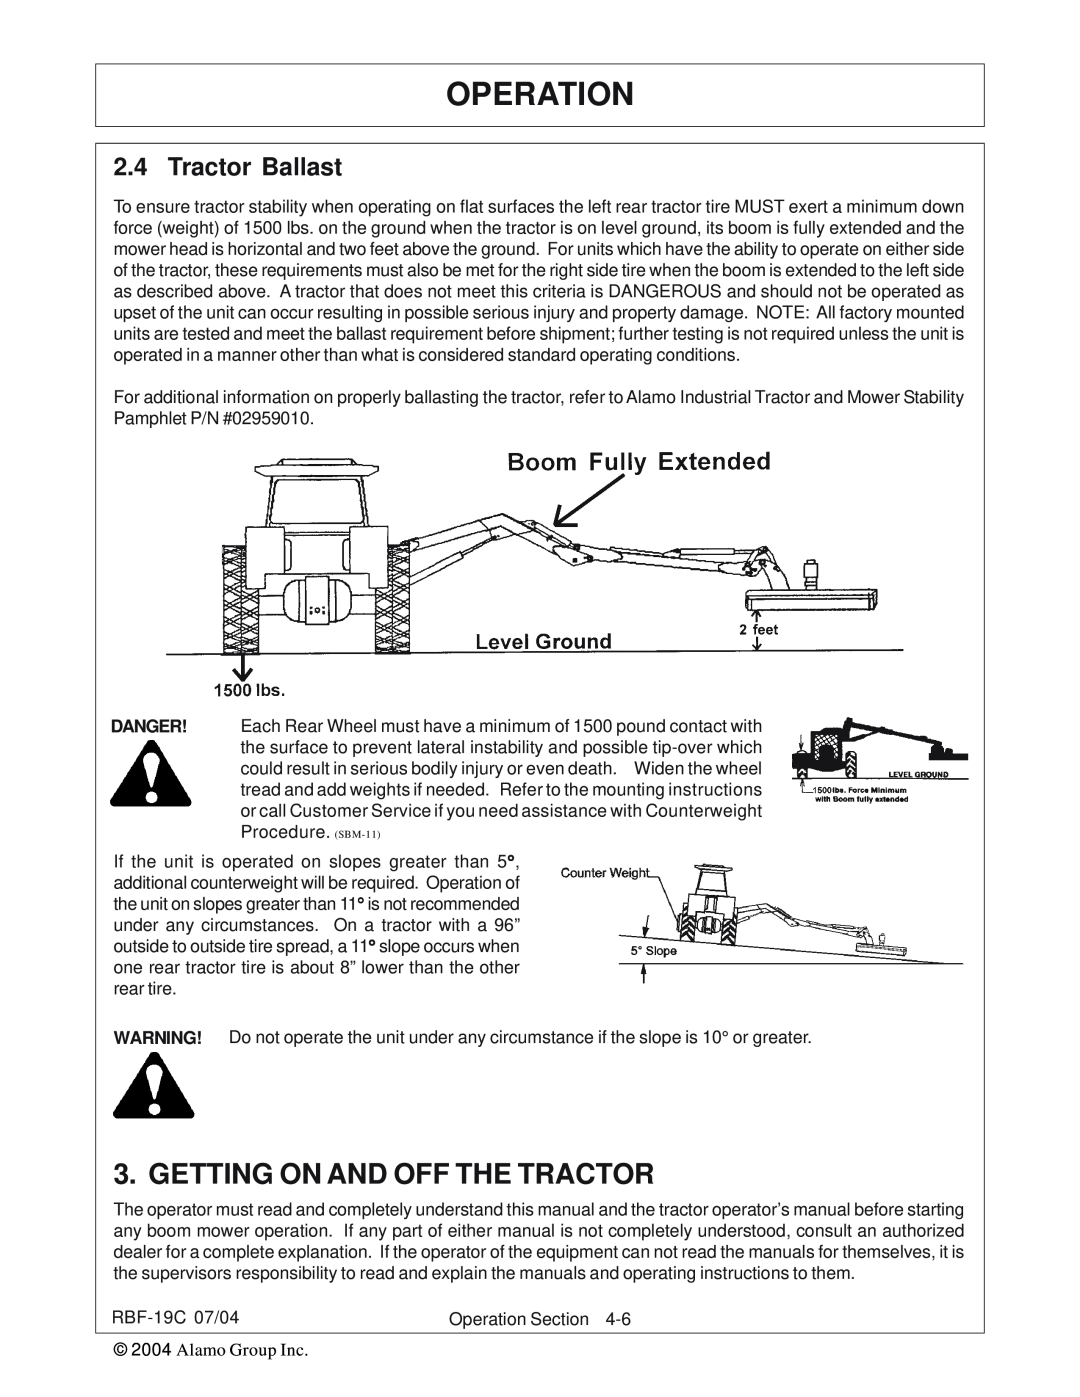 Tiger RBF-19C manual Getting On And Off The Tractor, Operation, Tractor Ballast 